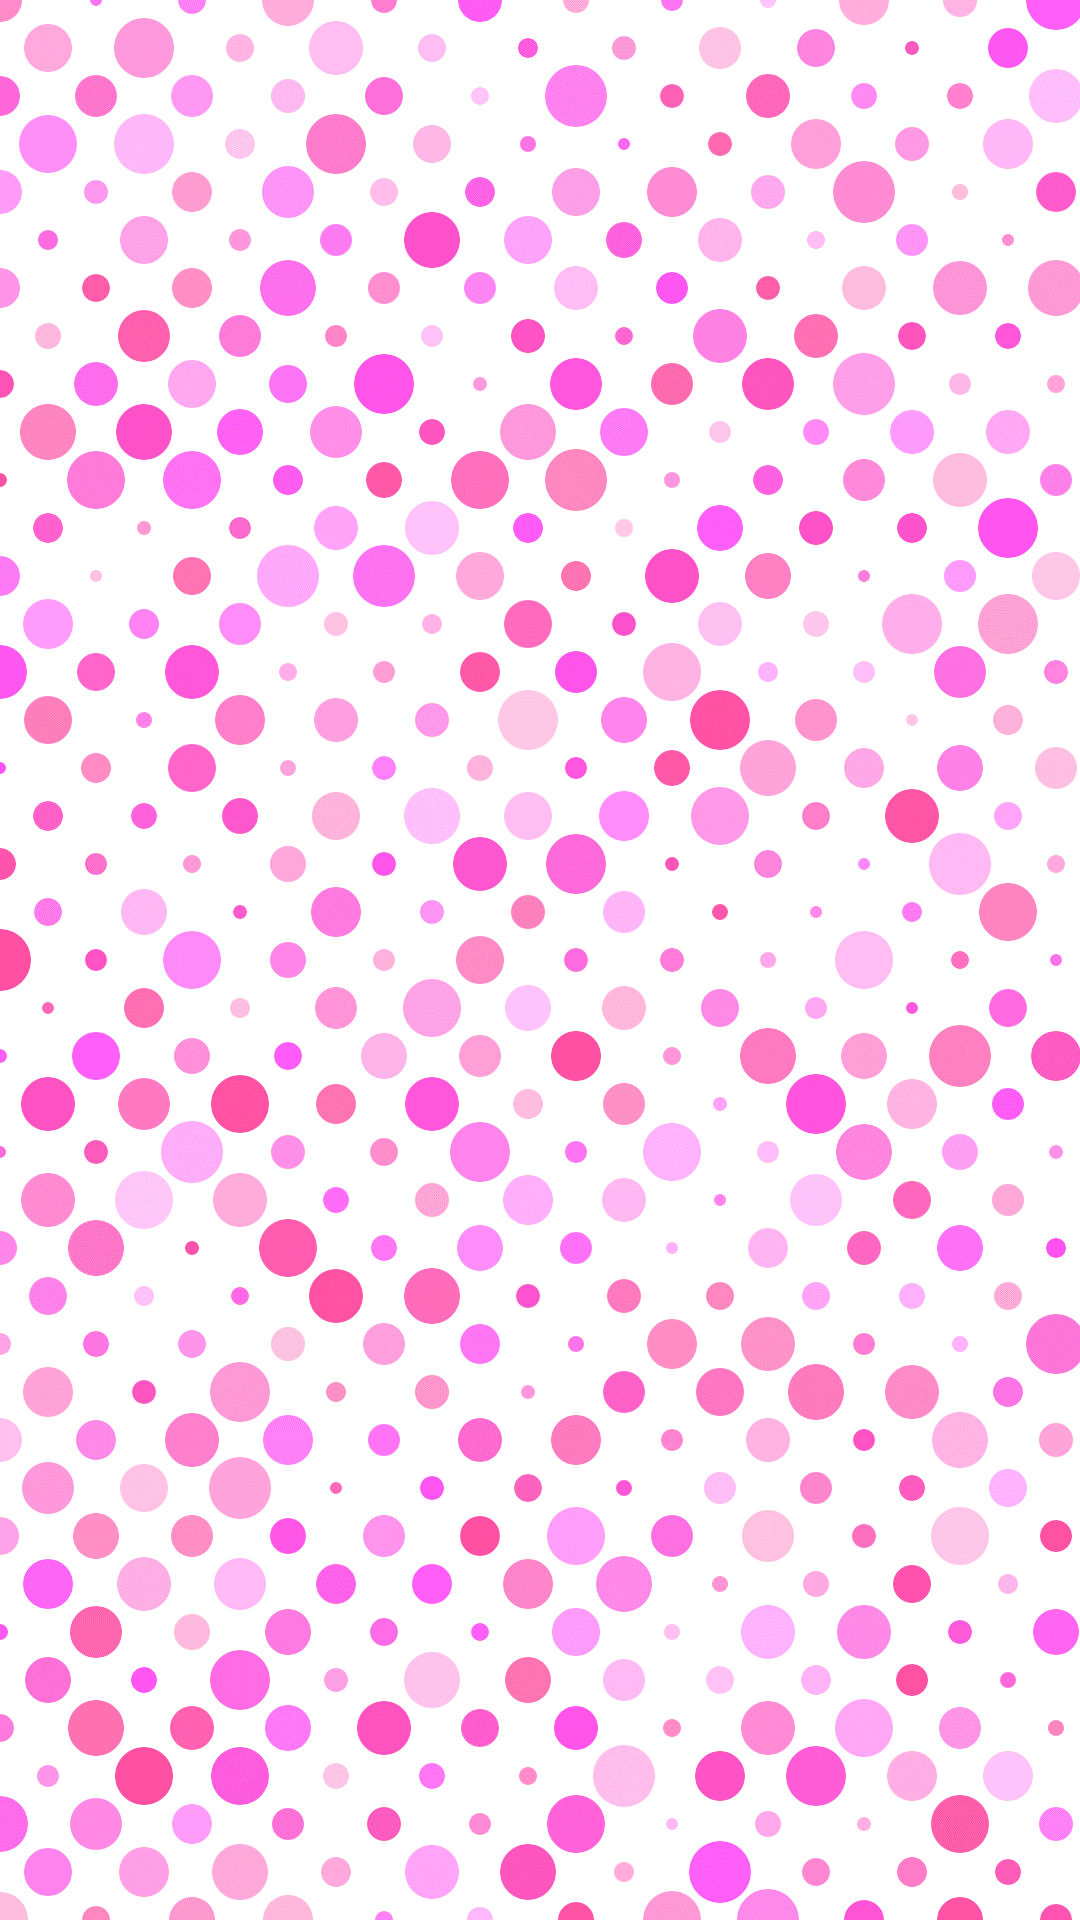 A cheerful pink polka-dot background brightens any day.